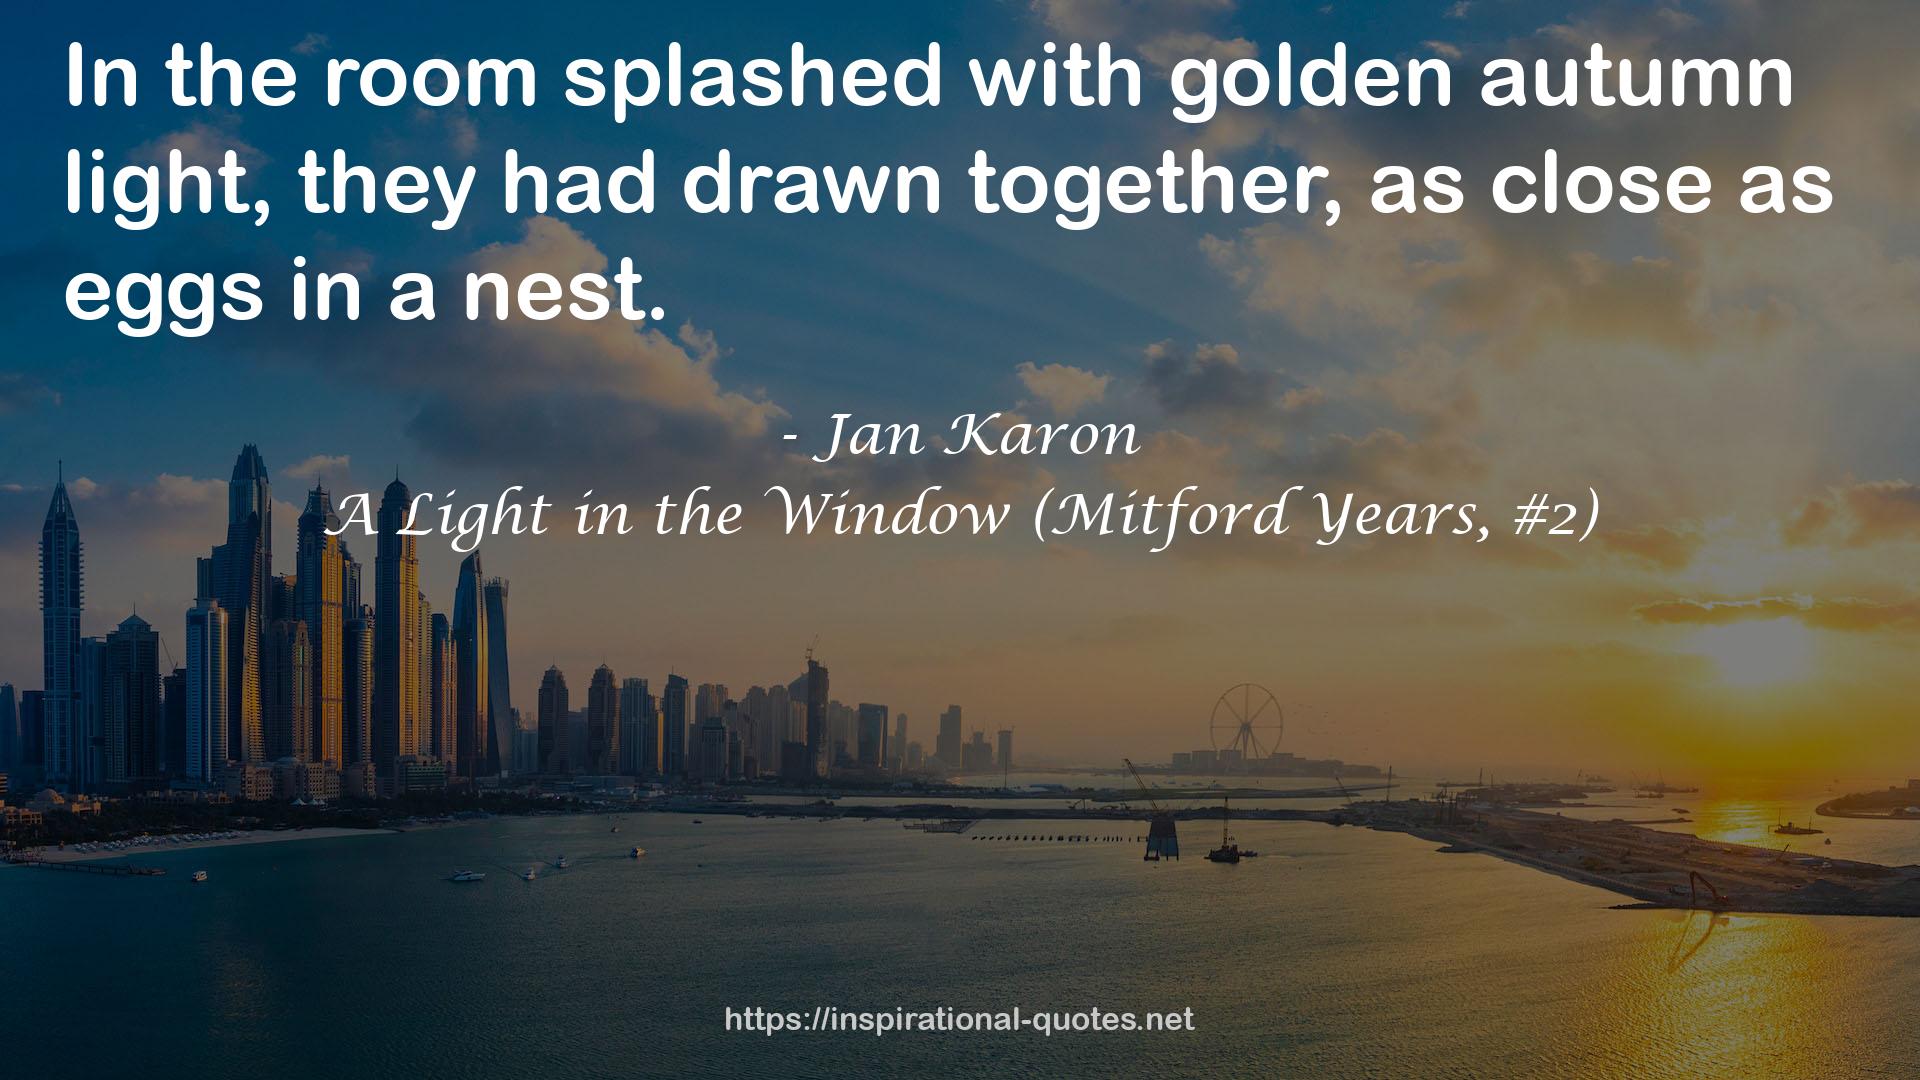 A Light in the Window (Mitford Years, #2) QUOTES